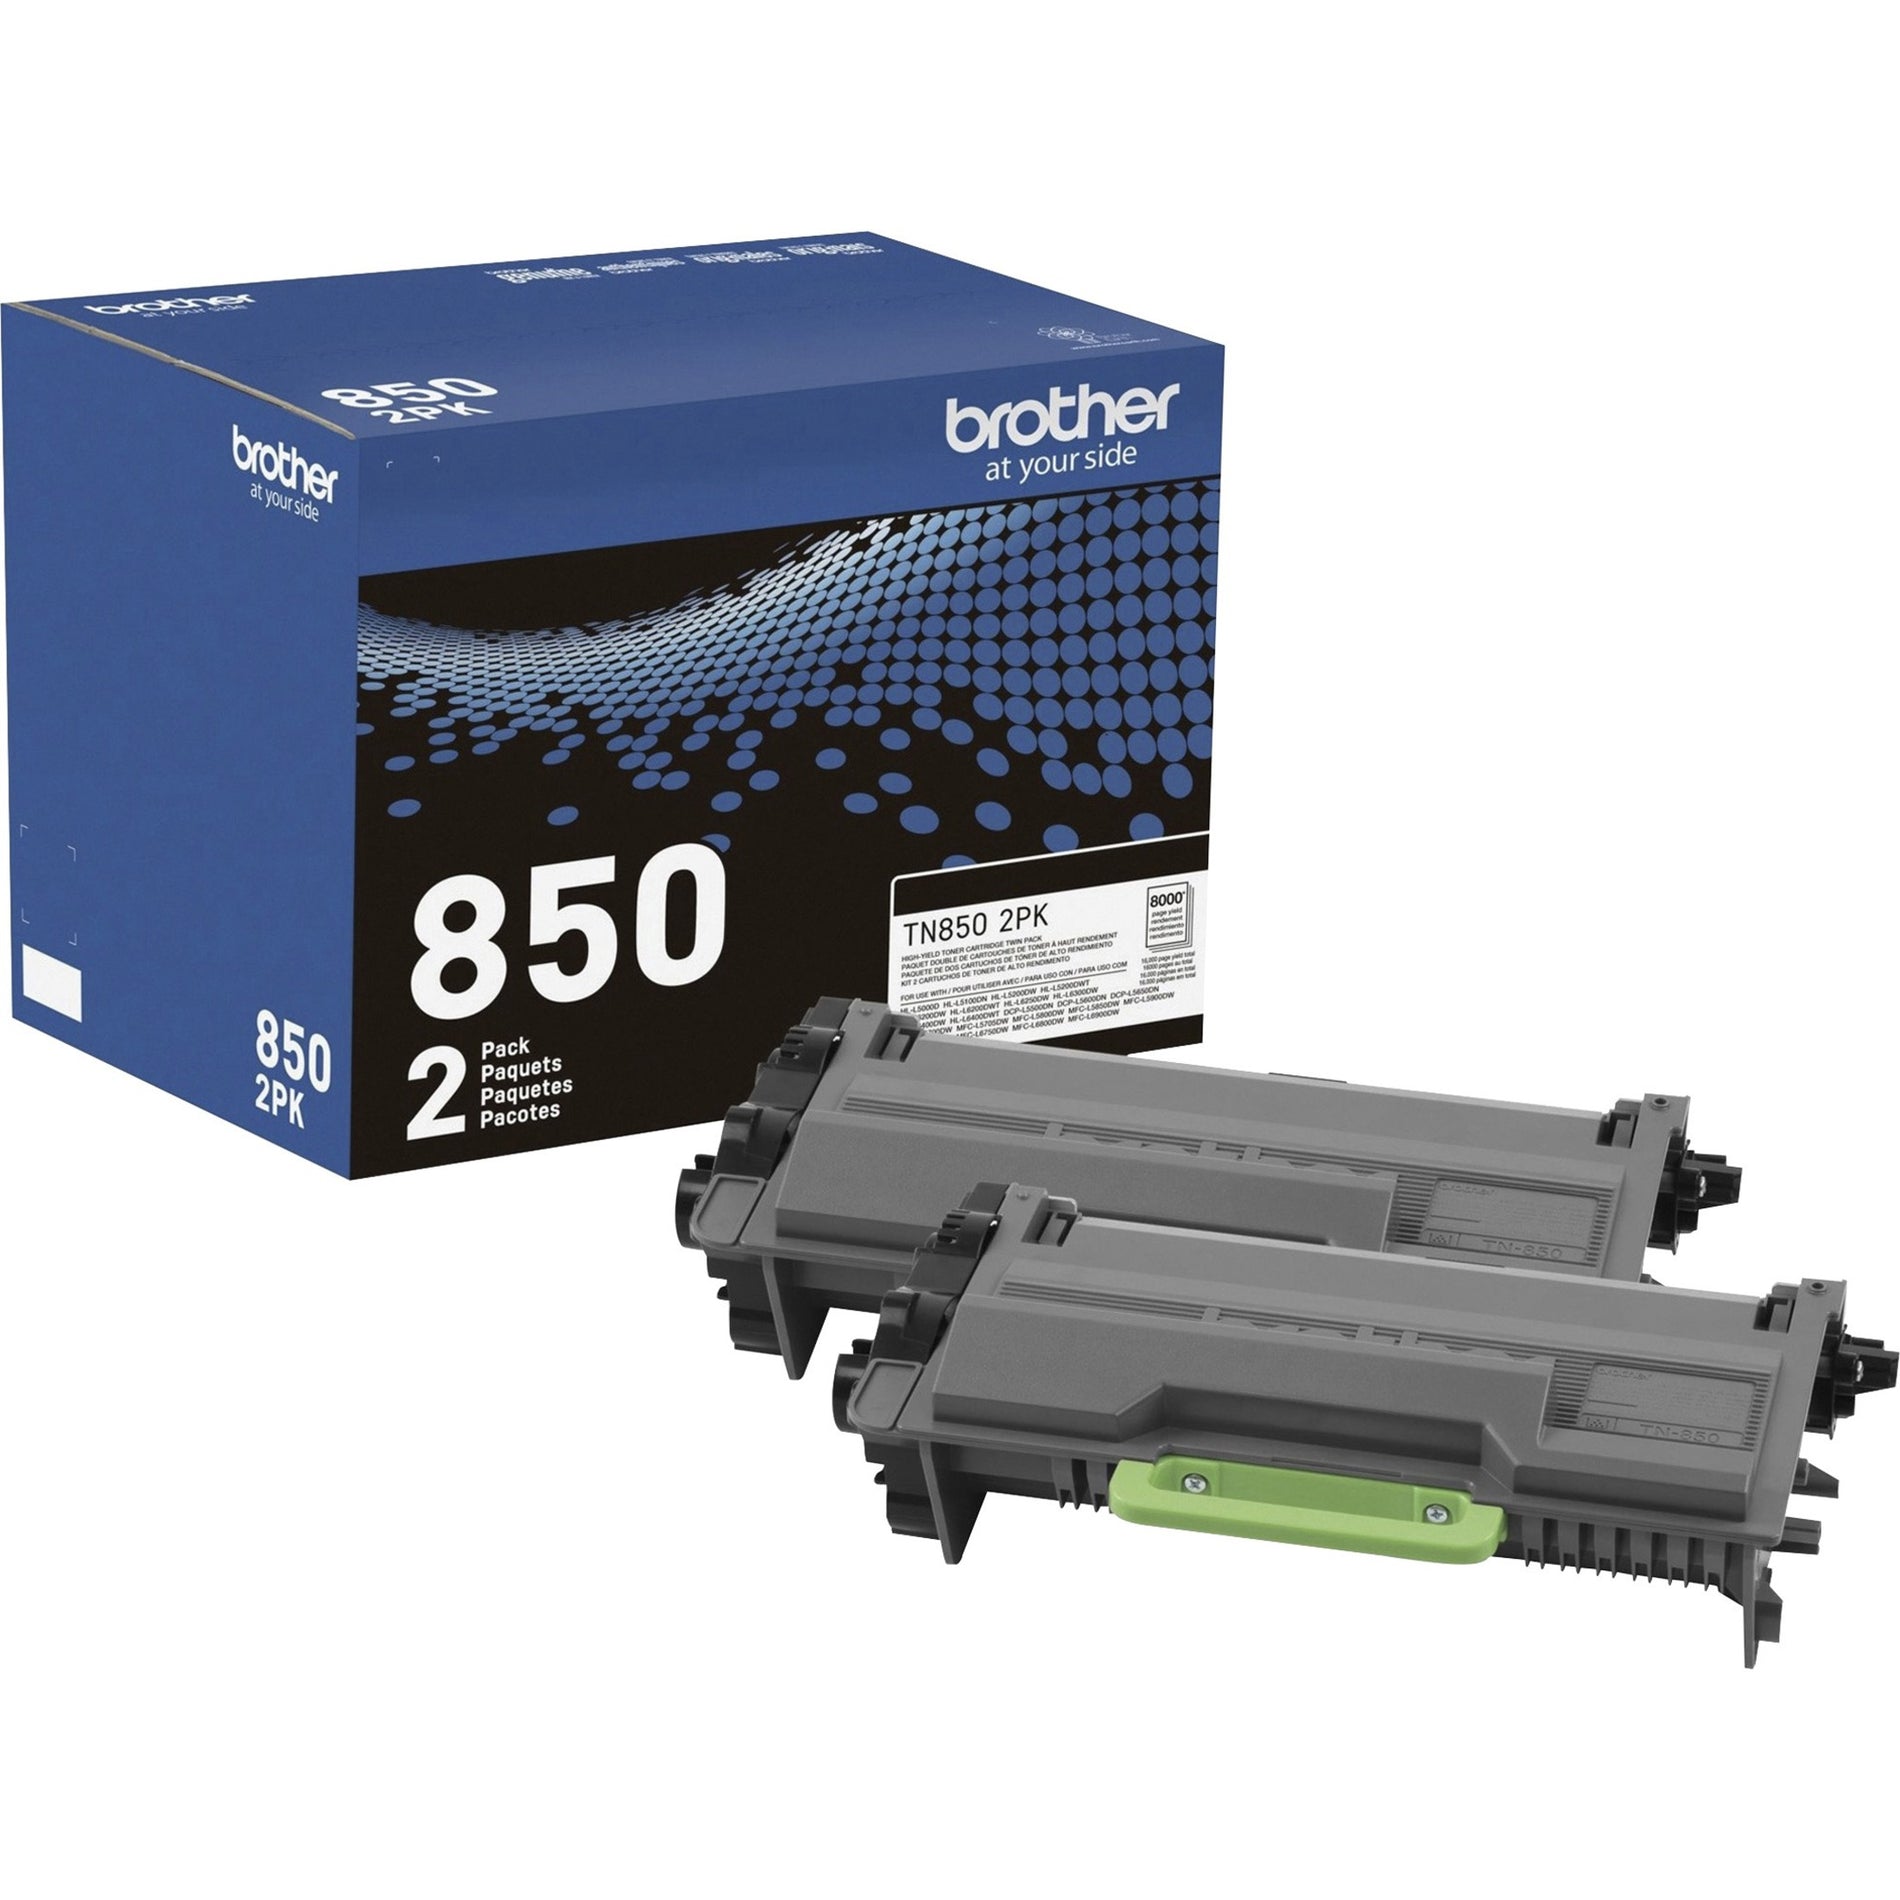 Brother TN8502PK High-Yield Toner Cartridge, 2-Pack, 8000 Pages Black